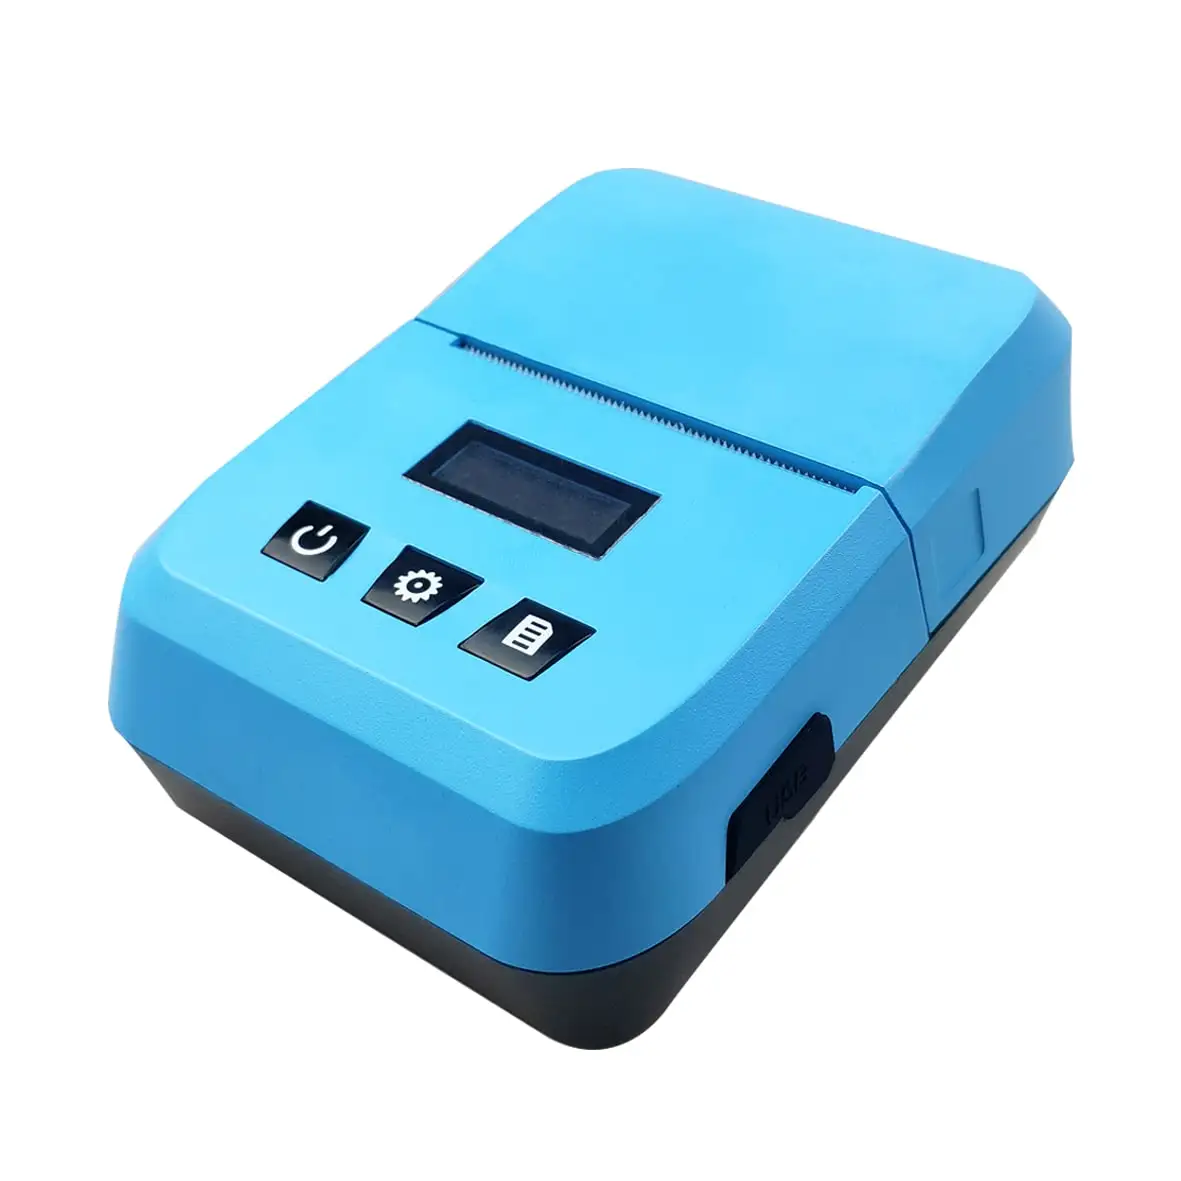 

OWNFOLK Android IOS Window USB BT 58MM Label Mini POS Thermal Barcode Sticker Printer